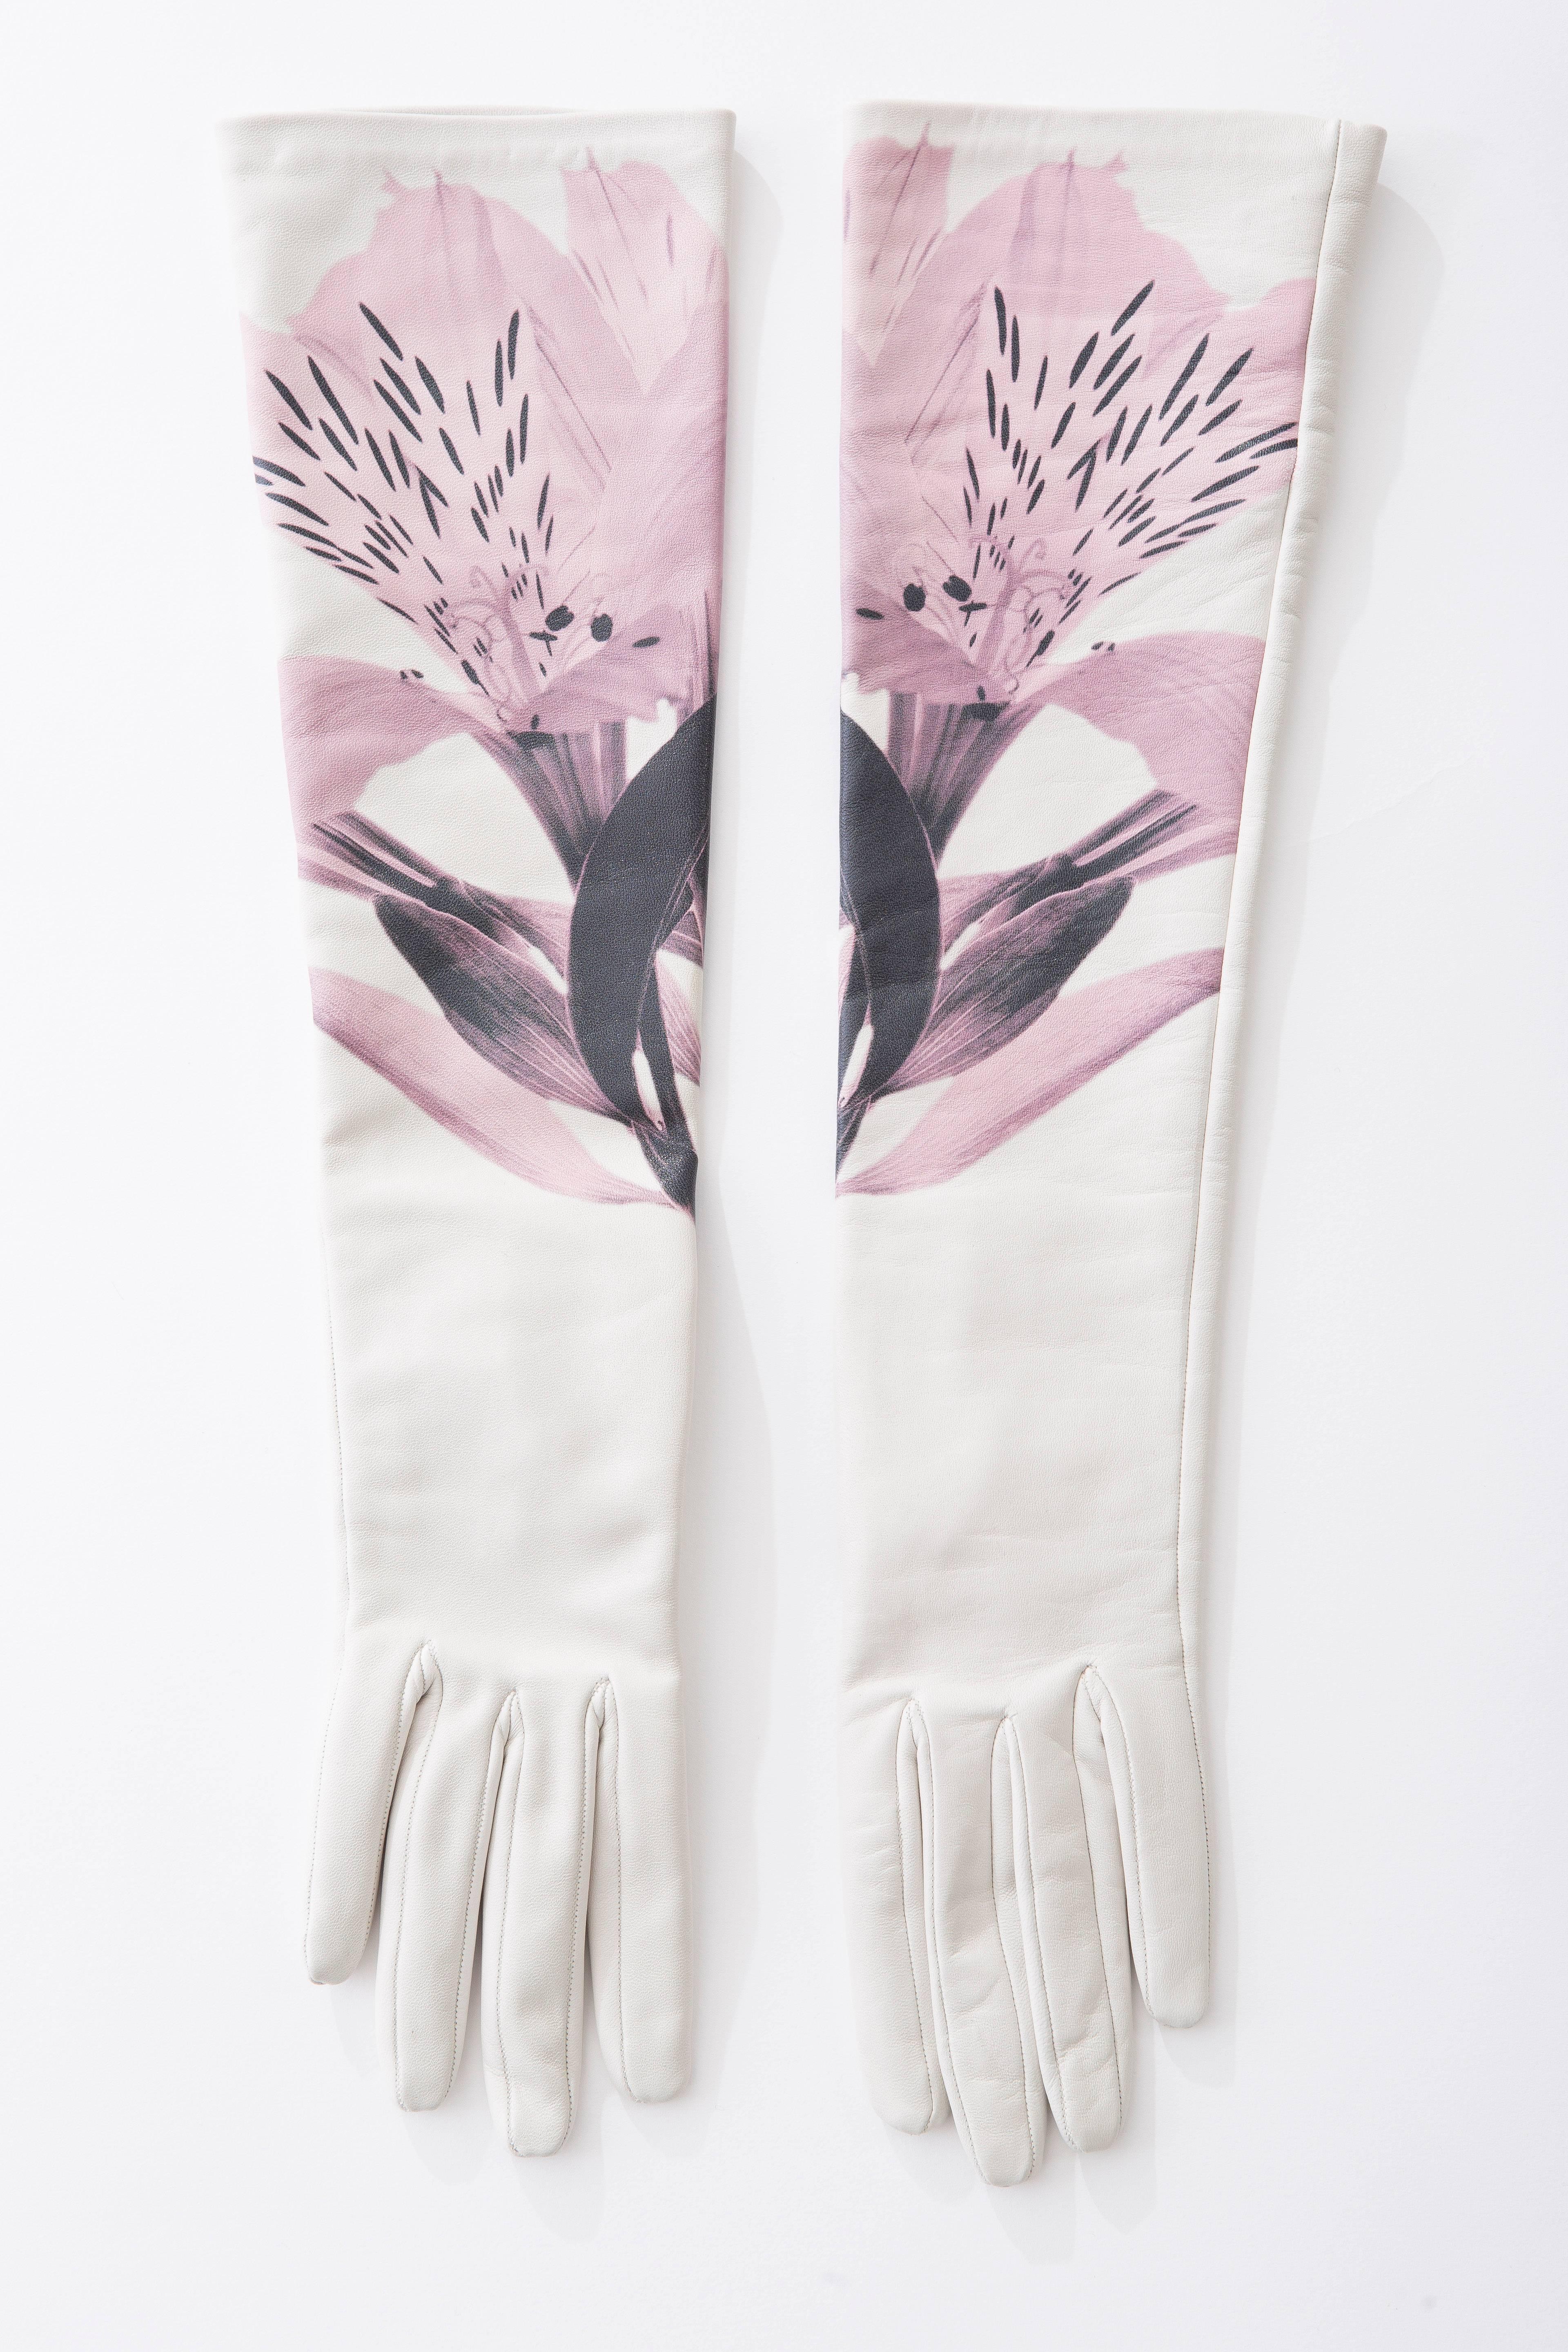 Christian Dior by Raf Simons, Pre - Fall 2014 ivory leather gloves with printed floral pattern and tonal stitching throughout. Designer size 7.5. Includes box and dust bag.

Length 17”, Width 5”
Fabric Content: 100% Leather; Lining 100% Silk